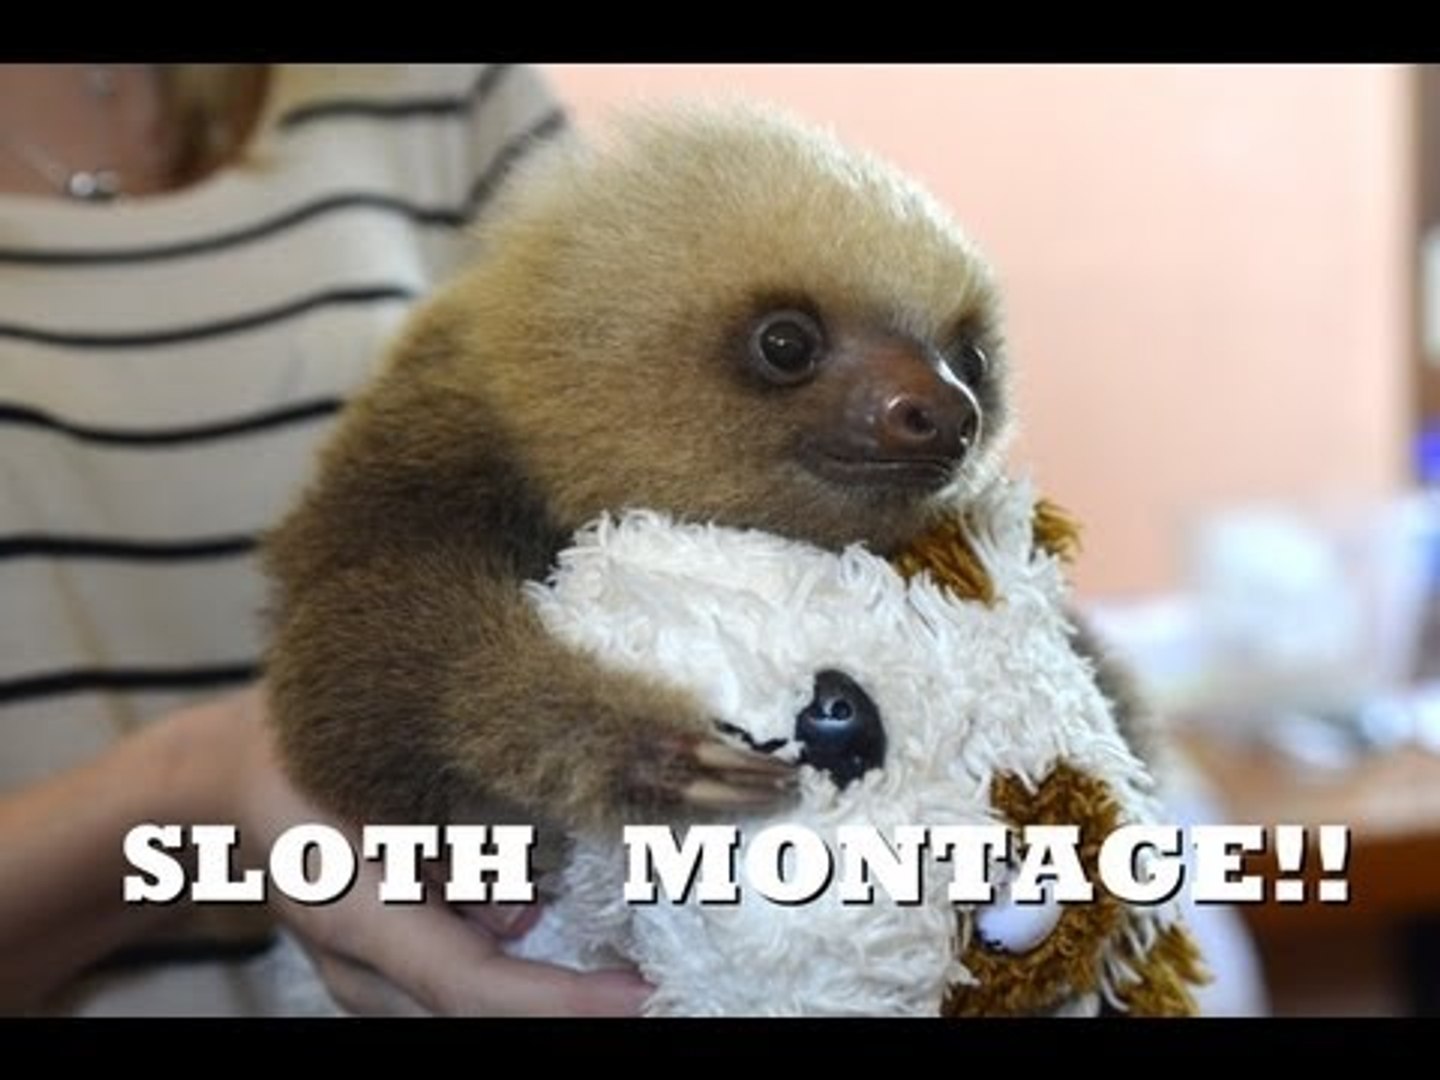 SLOTH MONTAGE! Funny, cute and adorable!